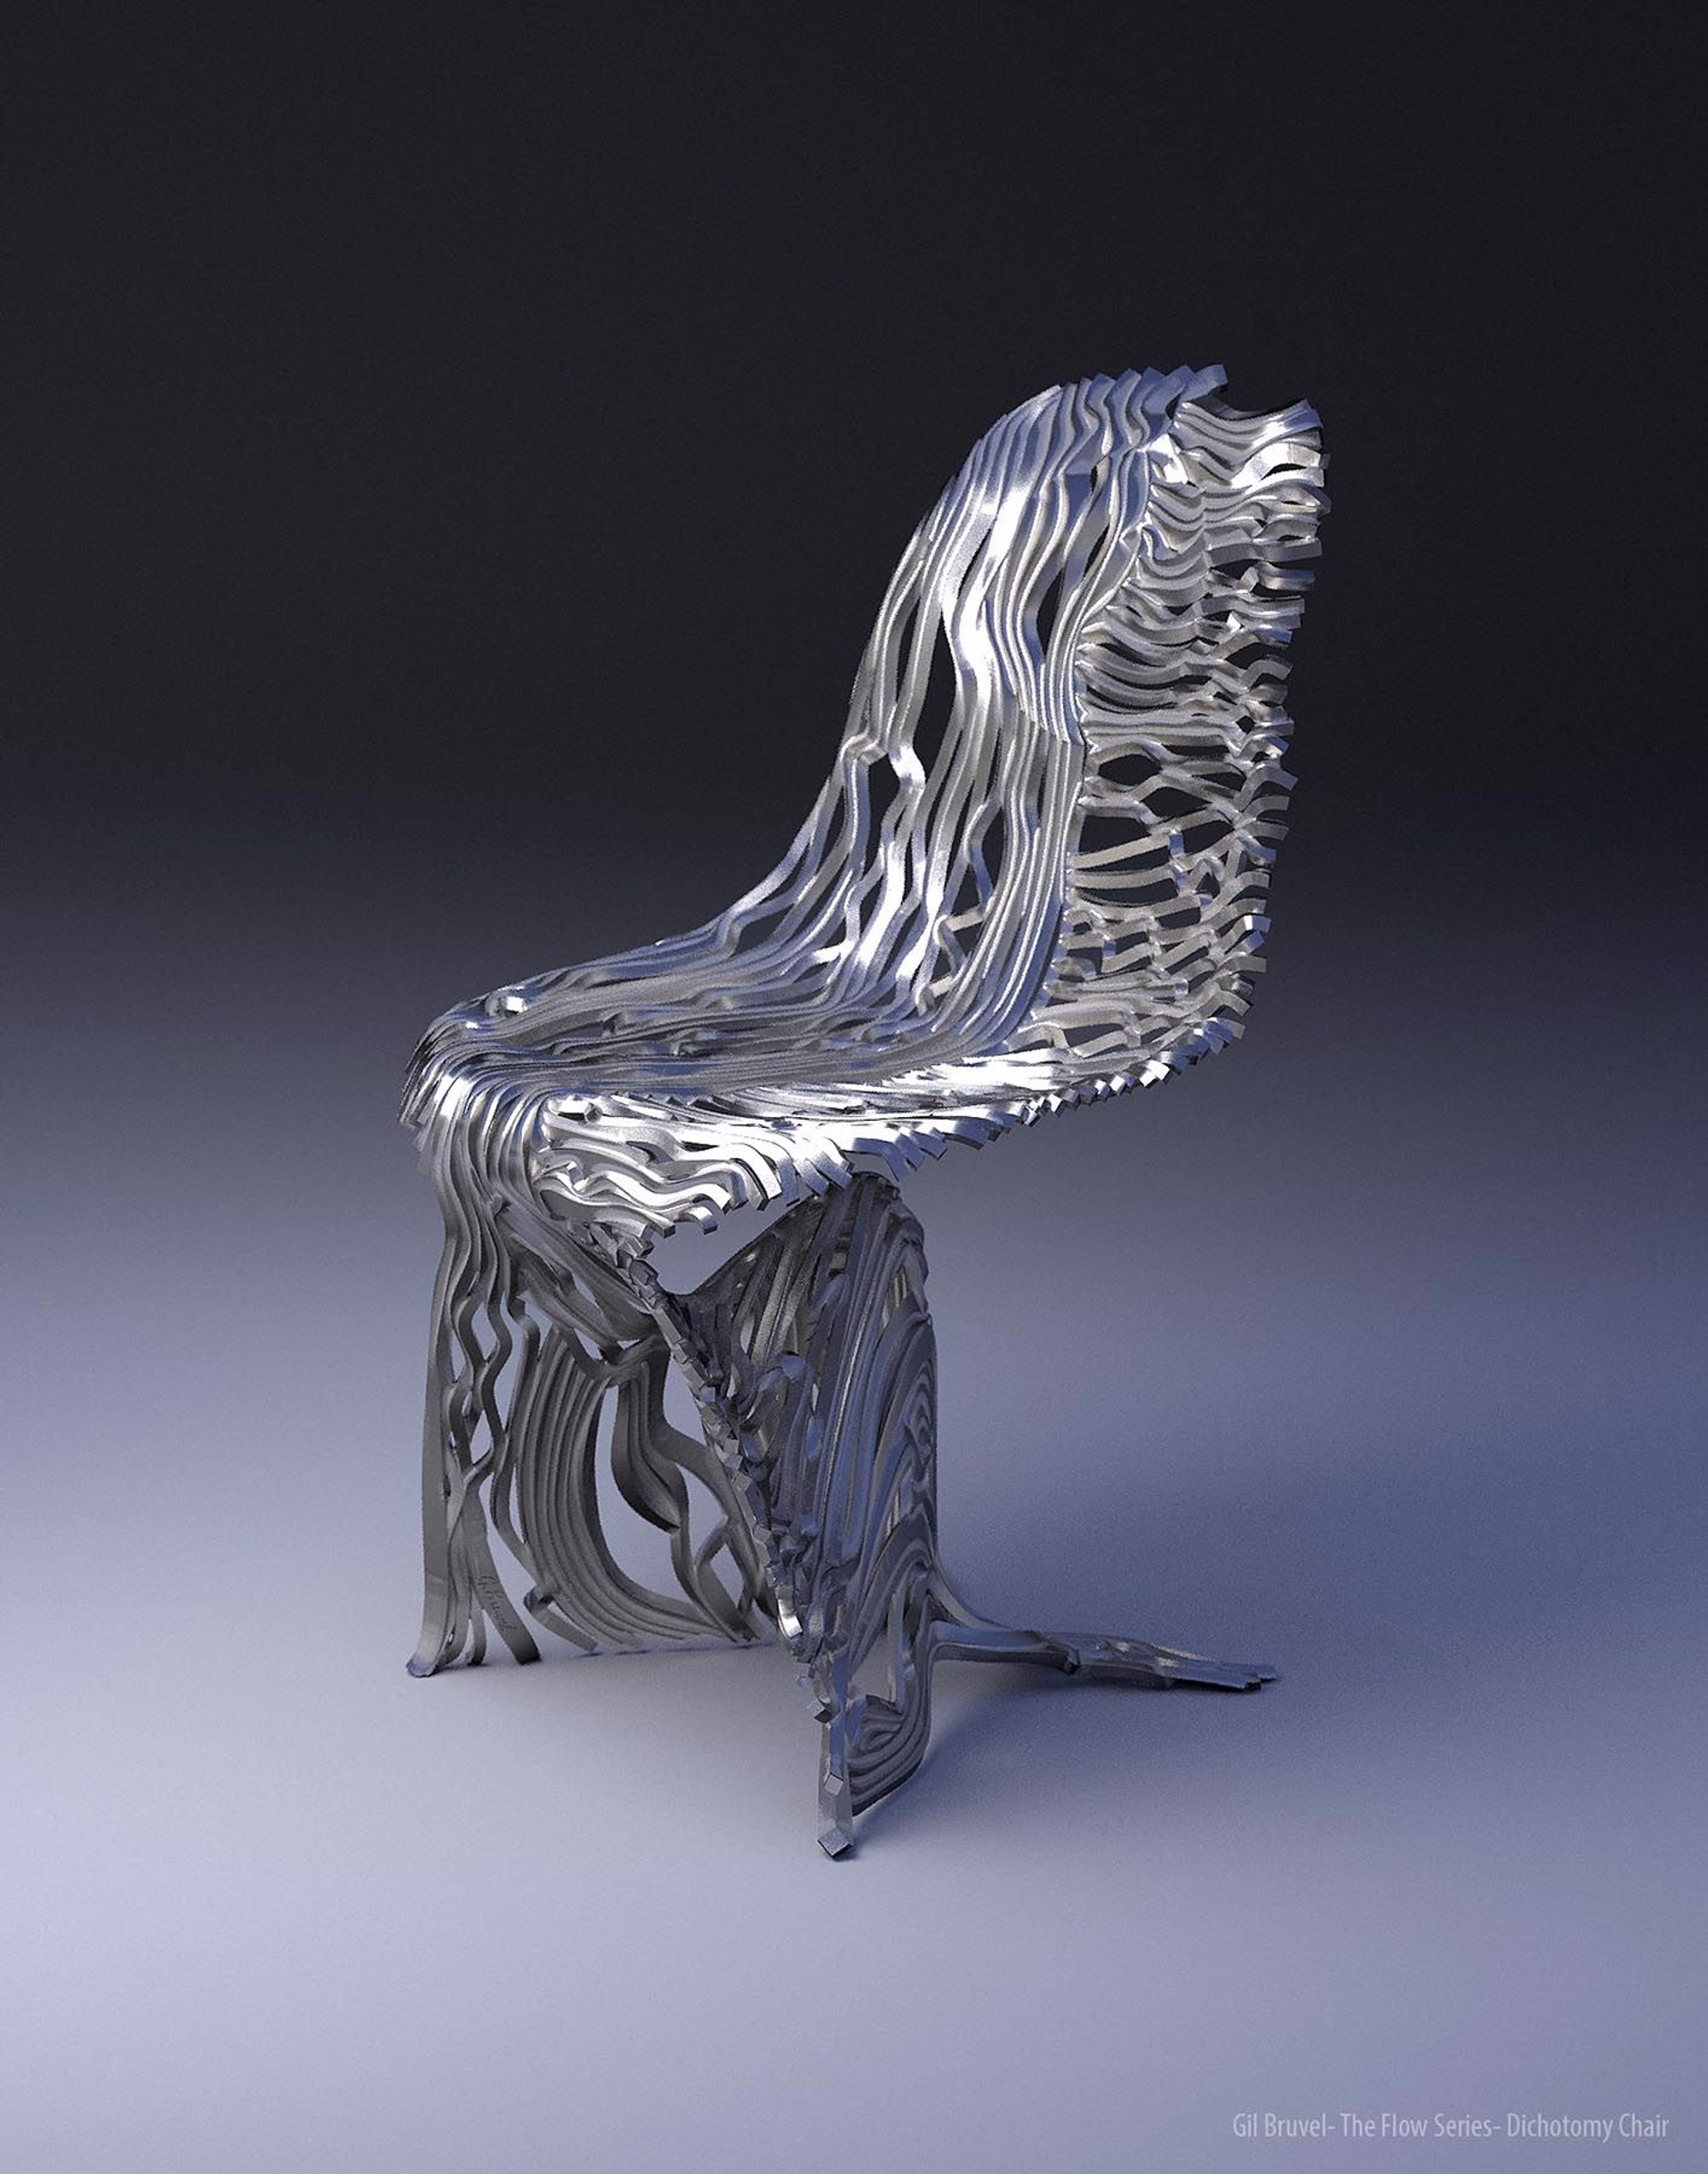 Dichotomy Chair by Gil Bruvel